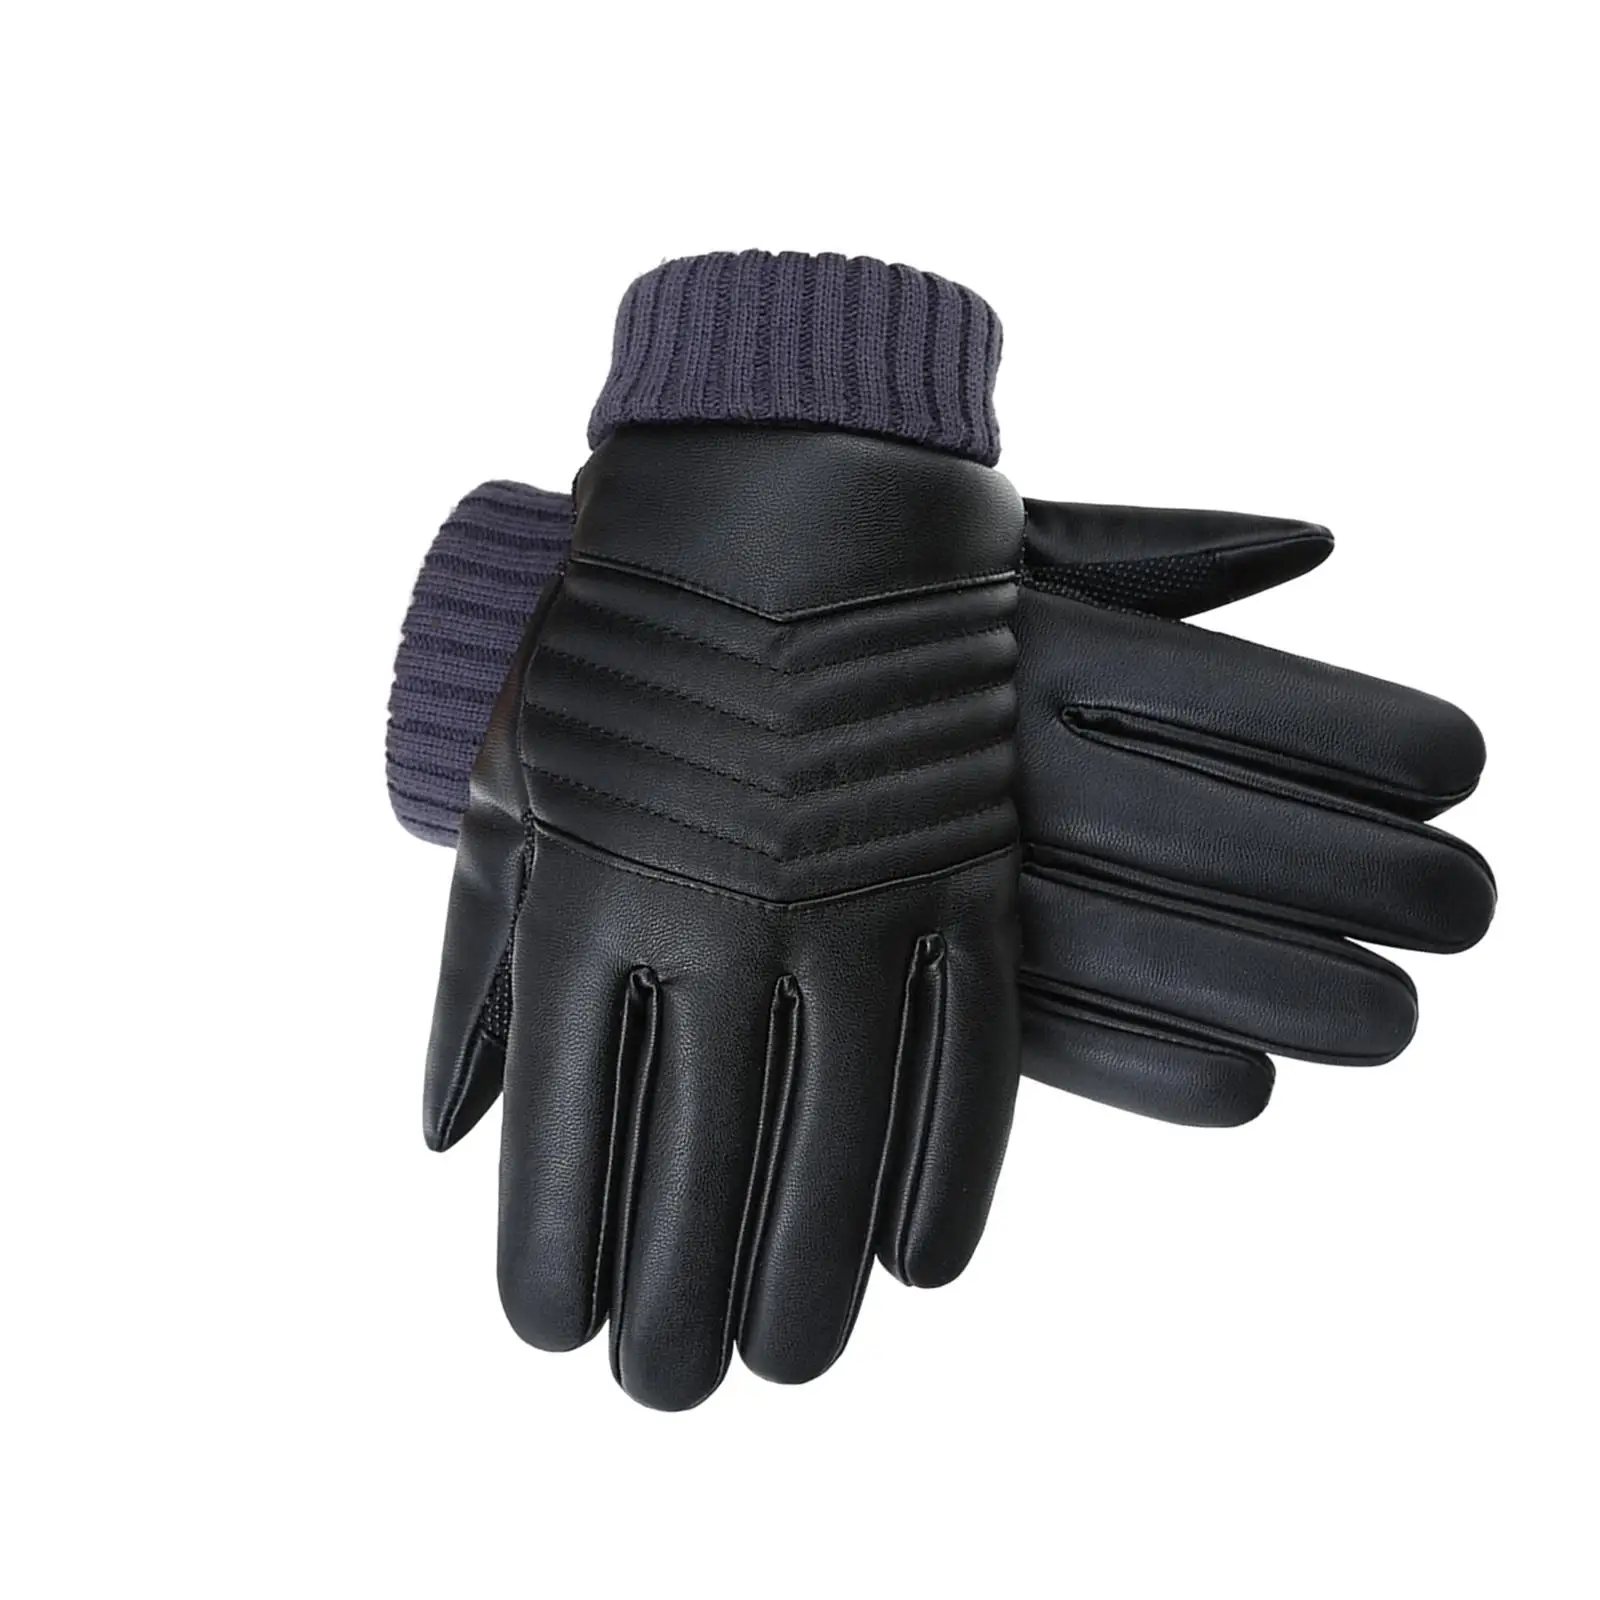 Winter gloves, wear-resistant, soft touch screen, non-slip, windproof,